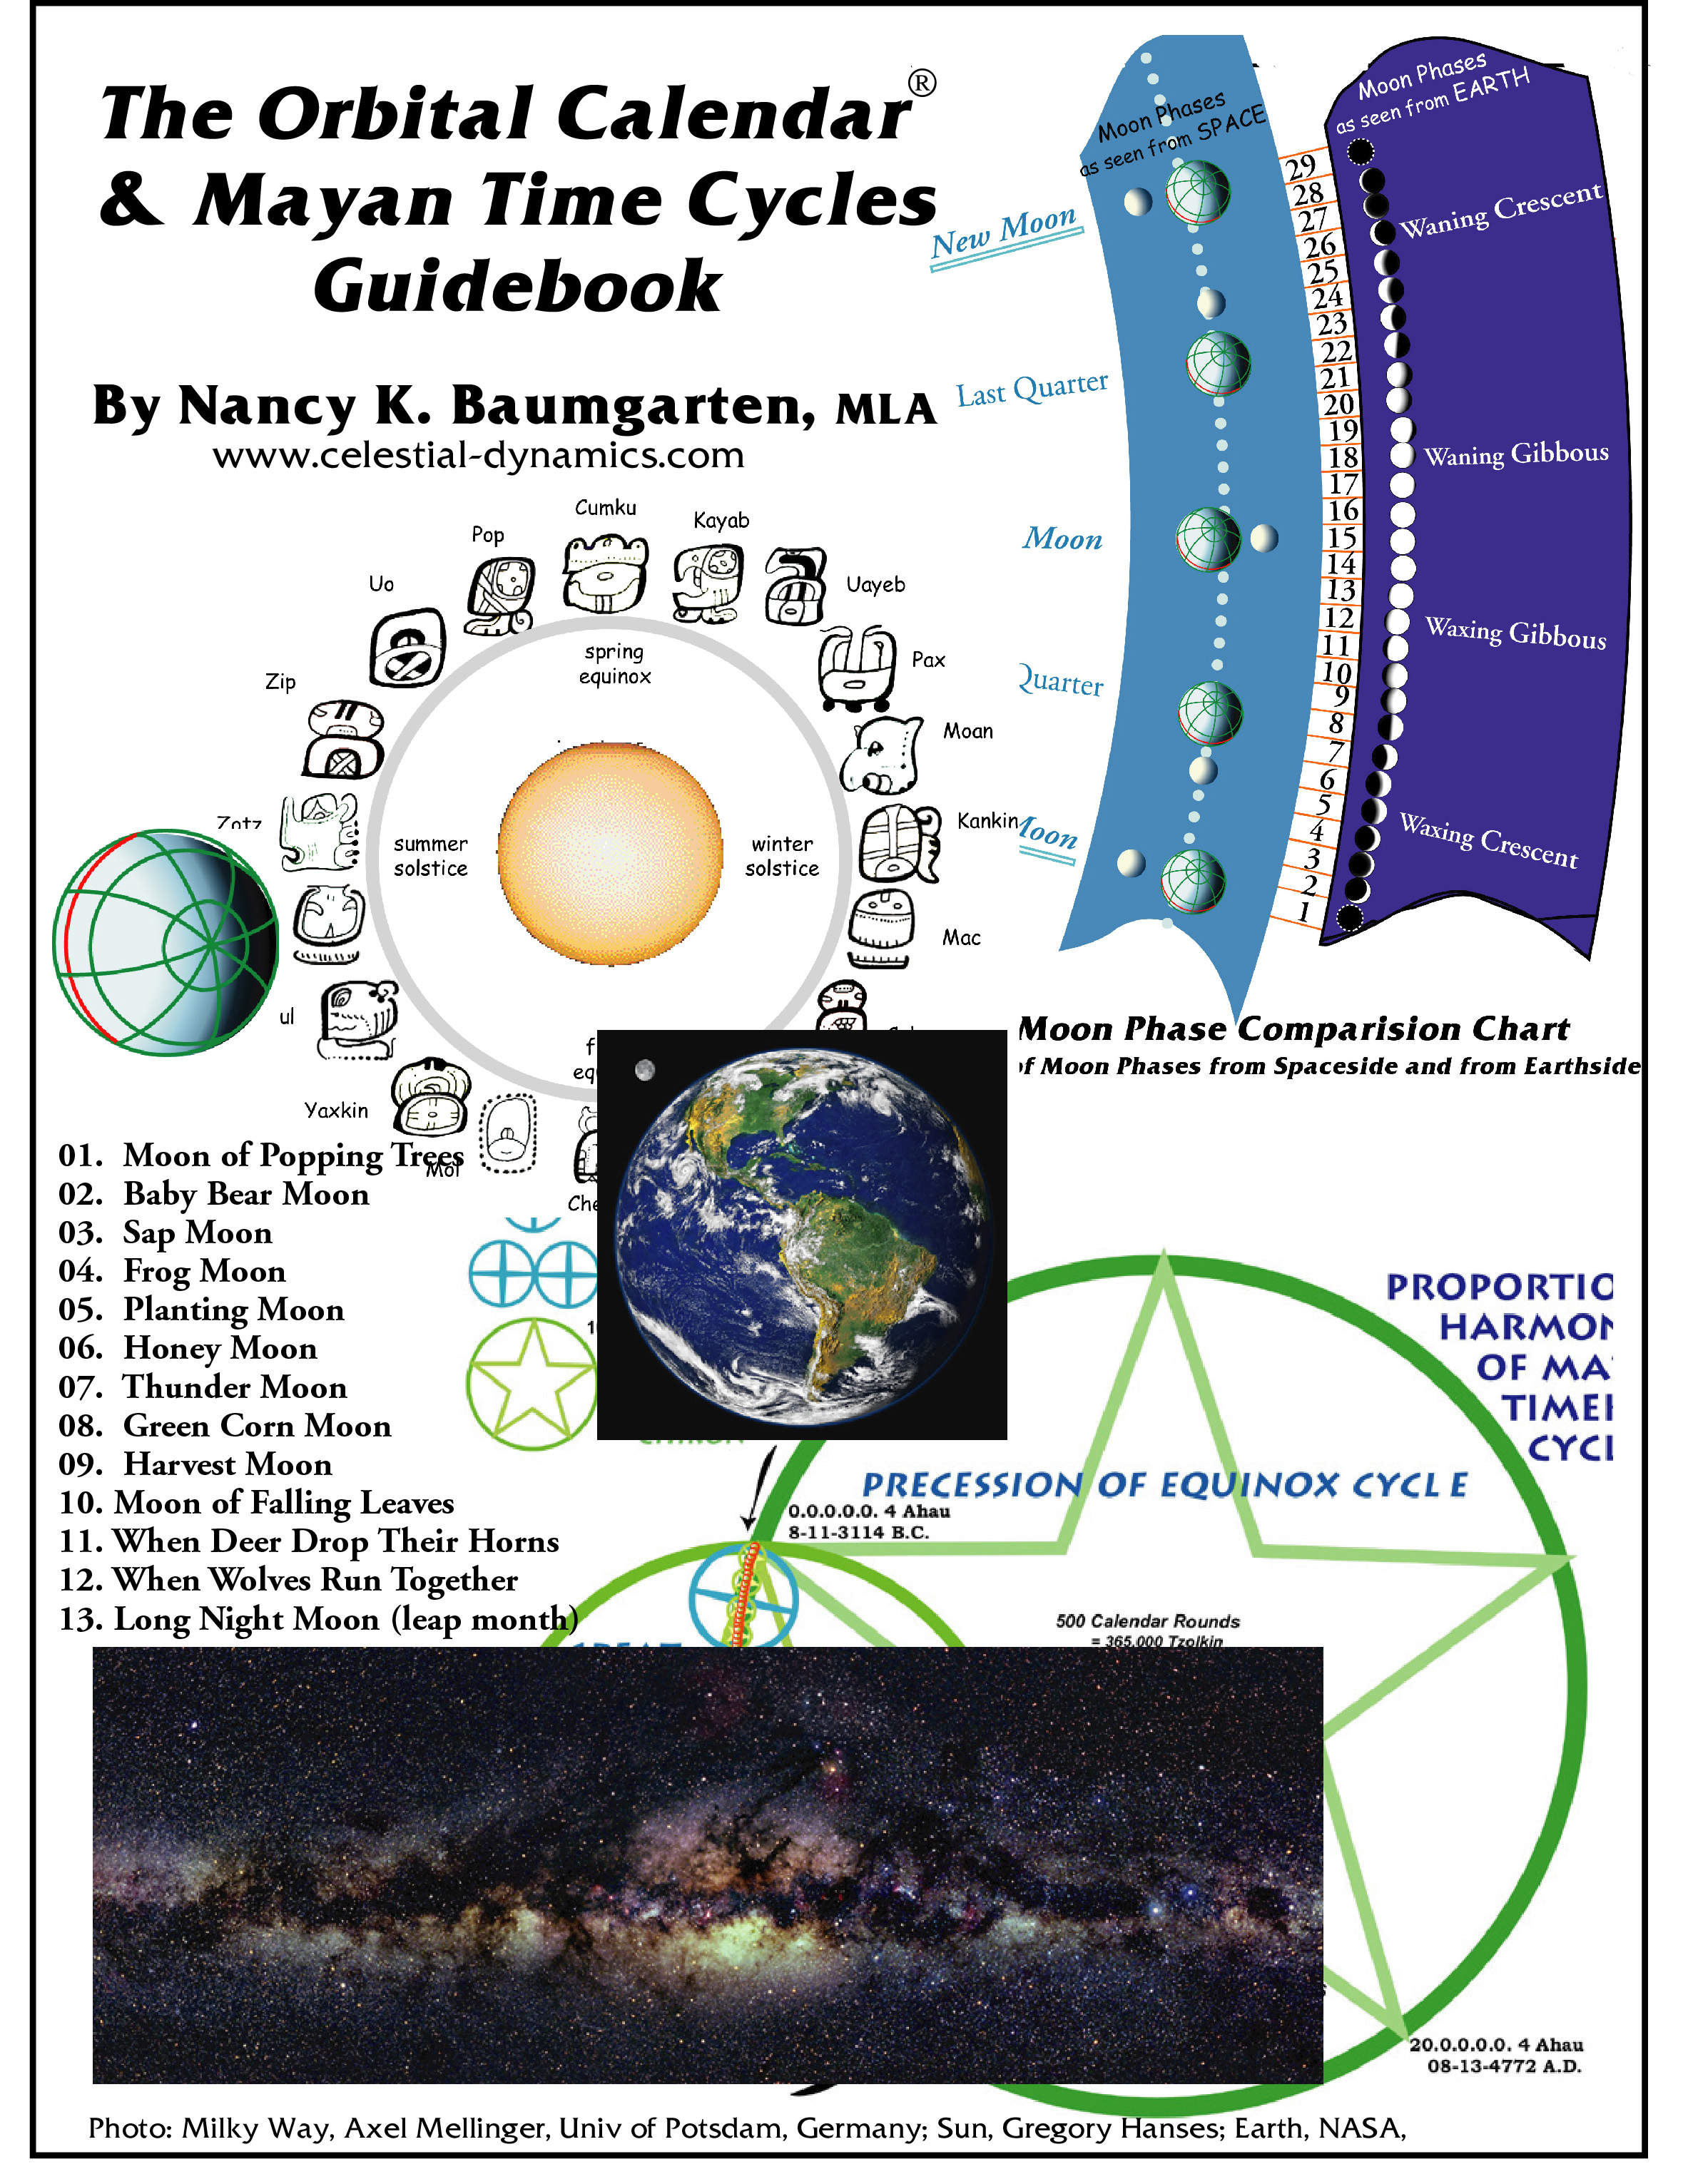 GUIDEBOOK to The Orbital Calendar and Mayan Time Cycles « Celestial